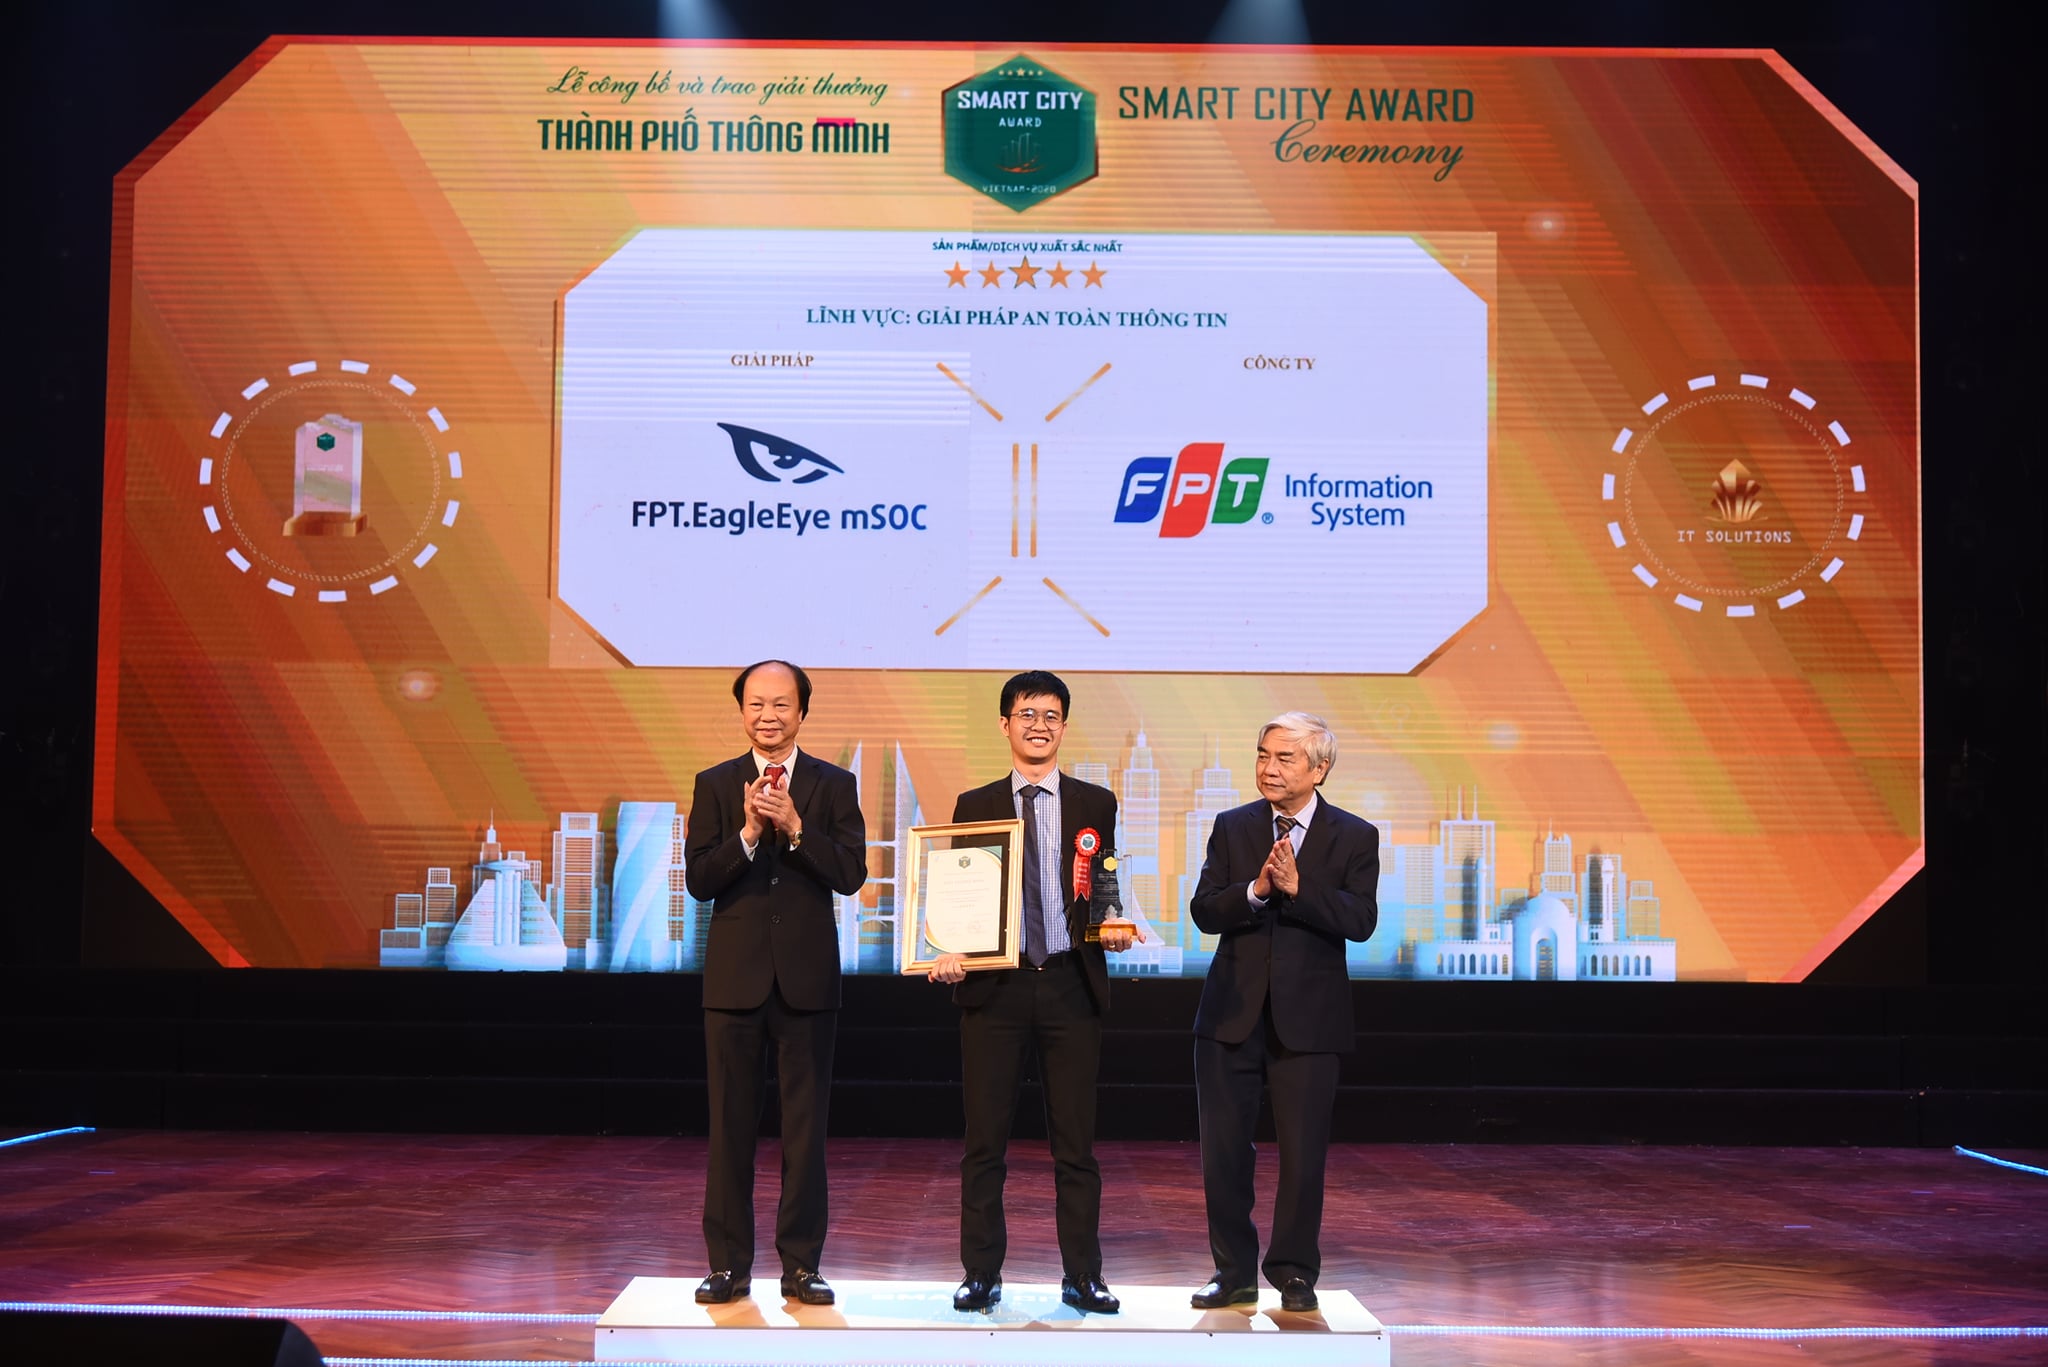 2020 Vietnam Smart City Awards (5-star) – Managed Security Operations Center (FPT.EagleEye mSOC)